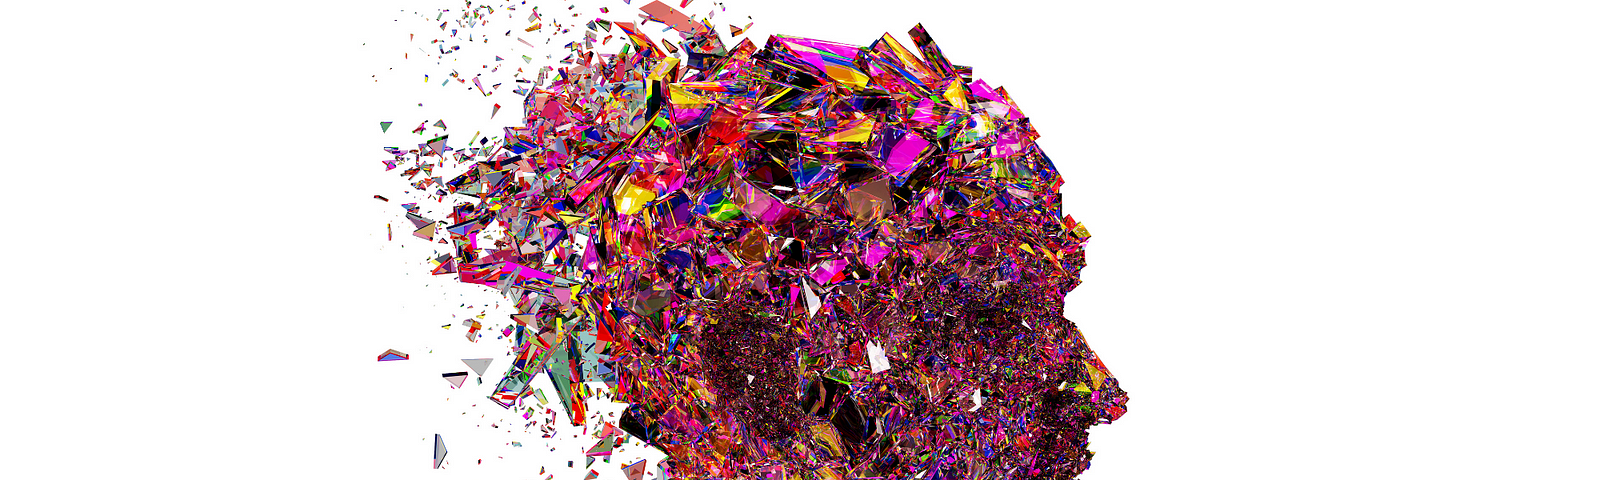 an artistic head with colors exploding from it